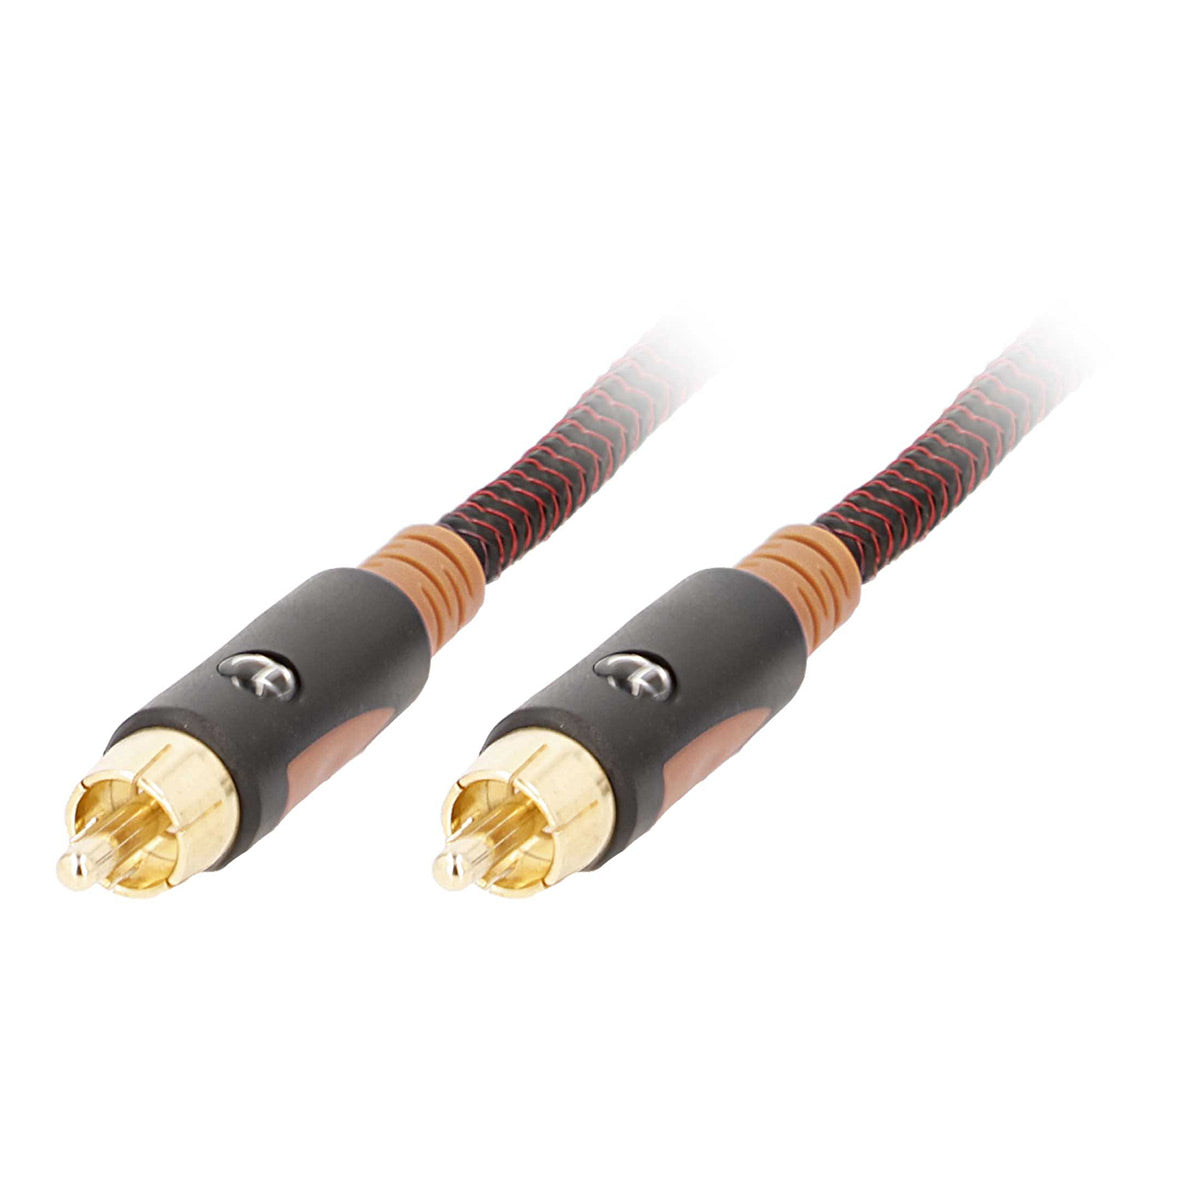 Helios Black Series Subwoofer Cable - 16 ft.